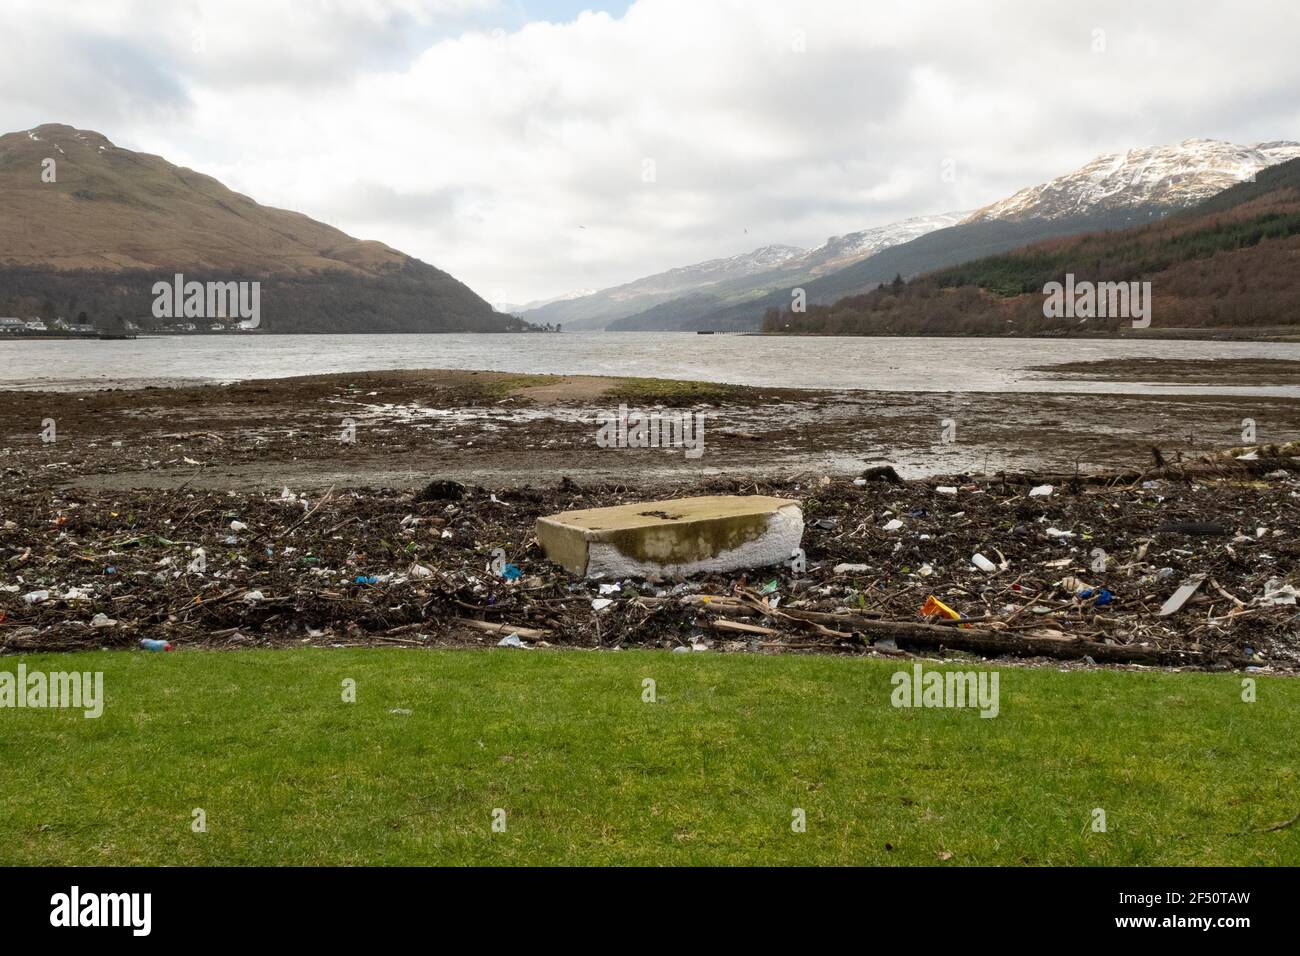 Marine litter including plastic and polystyrene washed up on the shores of Arrochar at the head of Loch Long, Scotland, UK Stock Photo